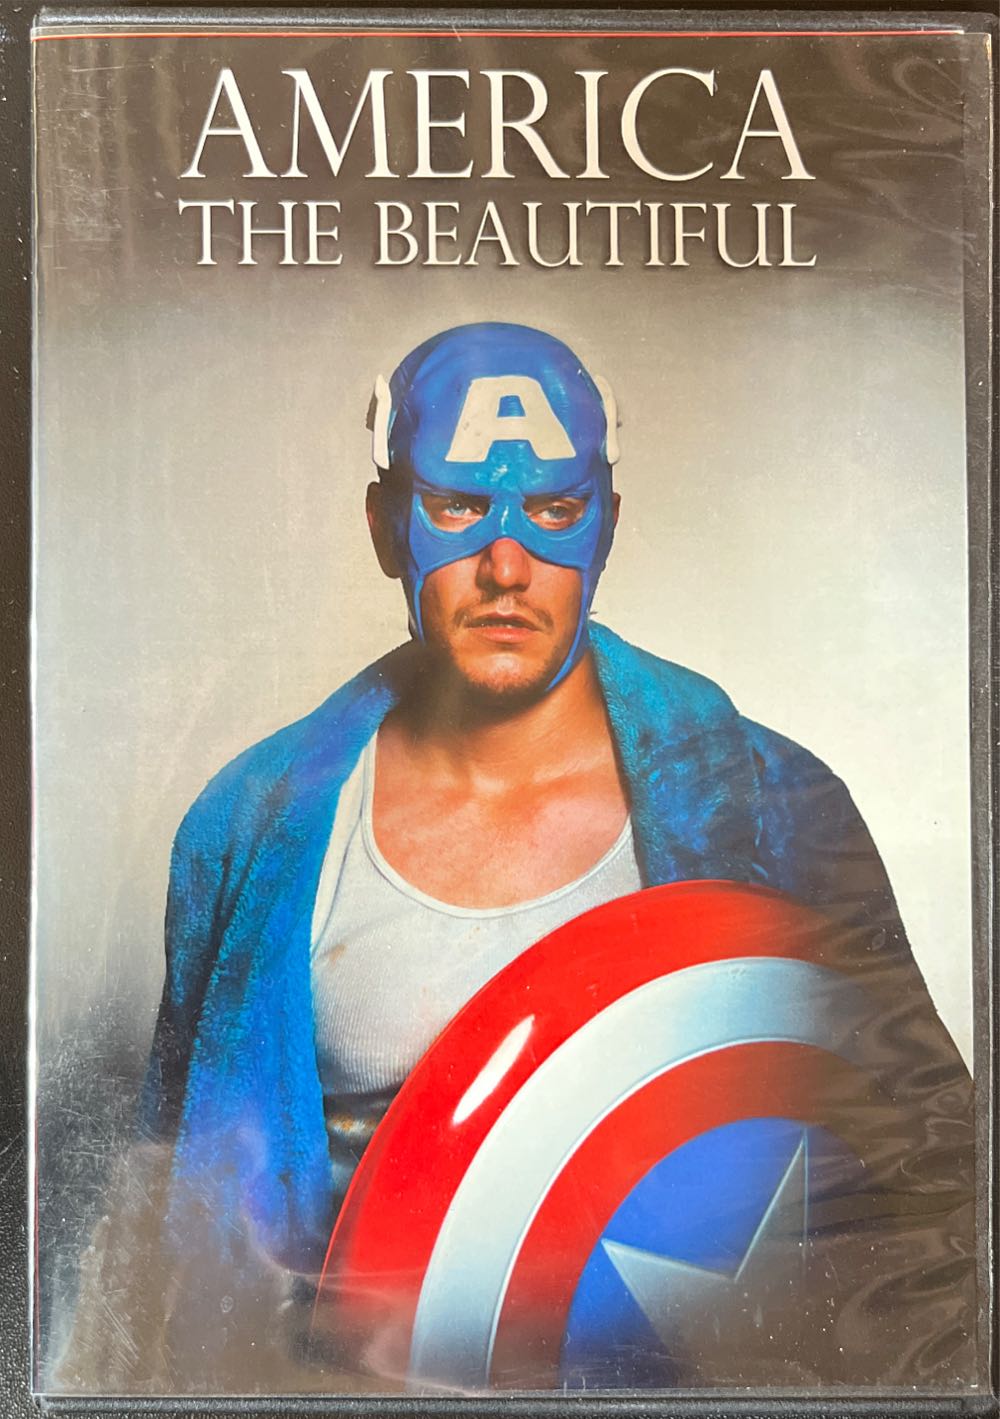 America The Beautiful DVD movie collectible - Main Image 1